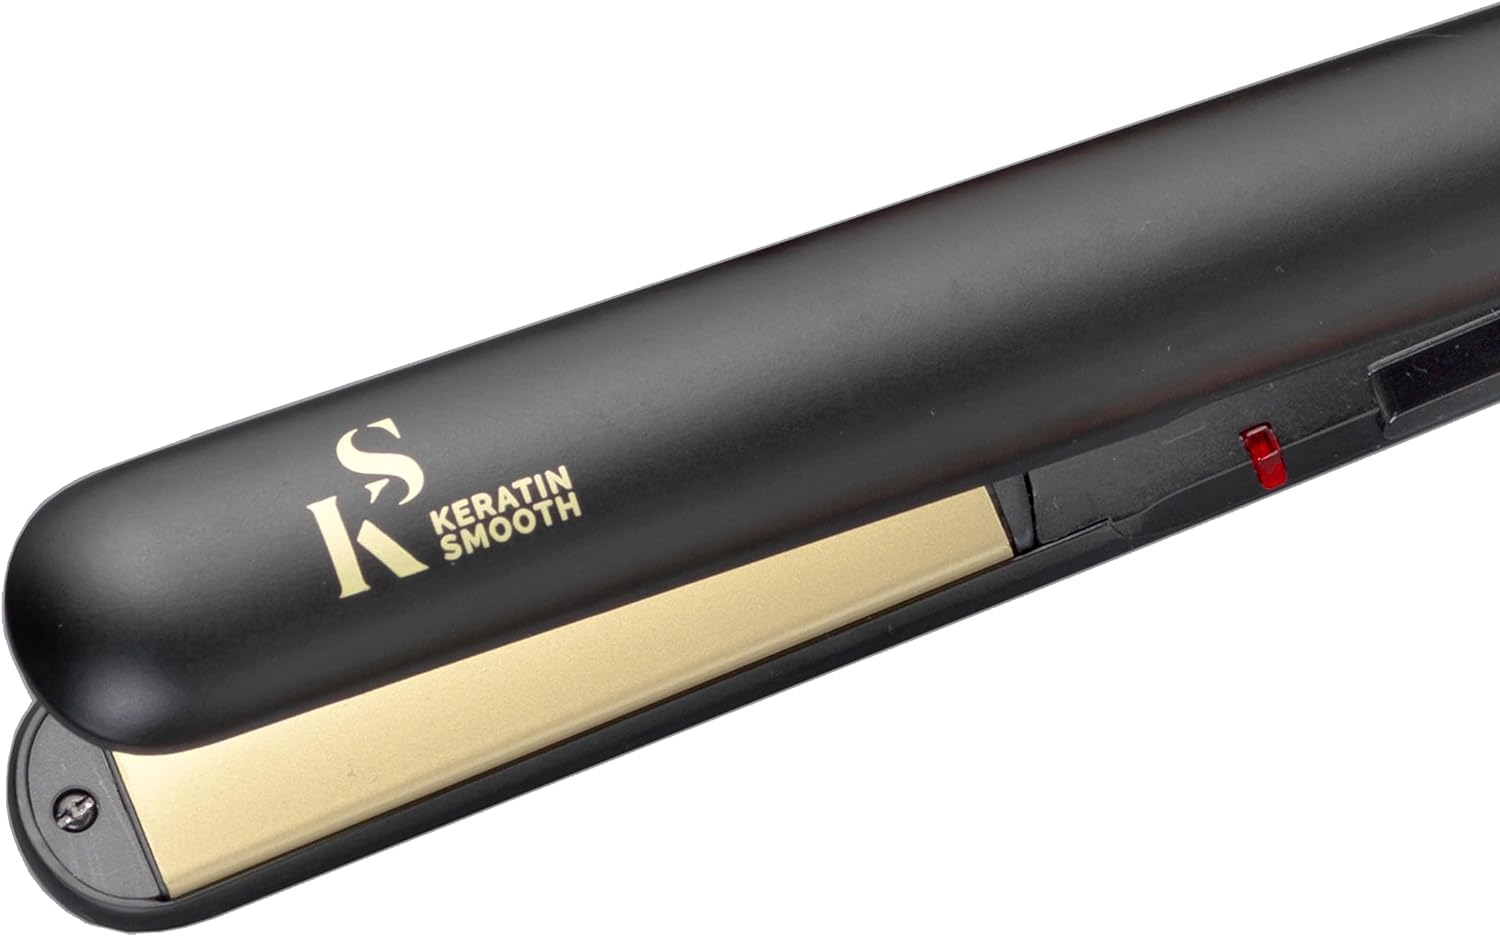 TRESemme Keratin Smooth Control Number 230 Straightener, Black